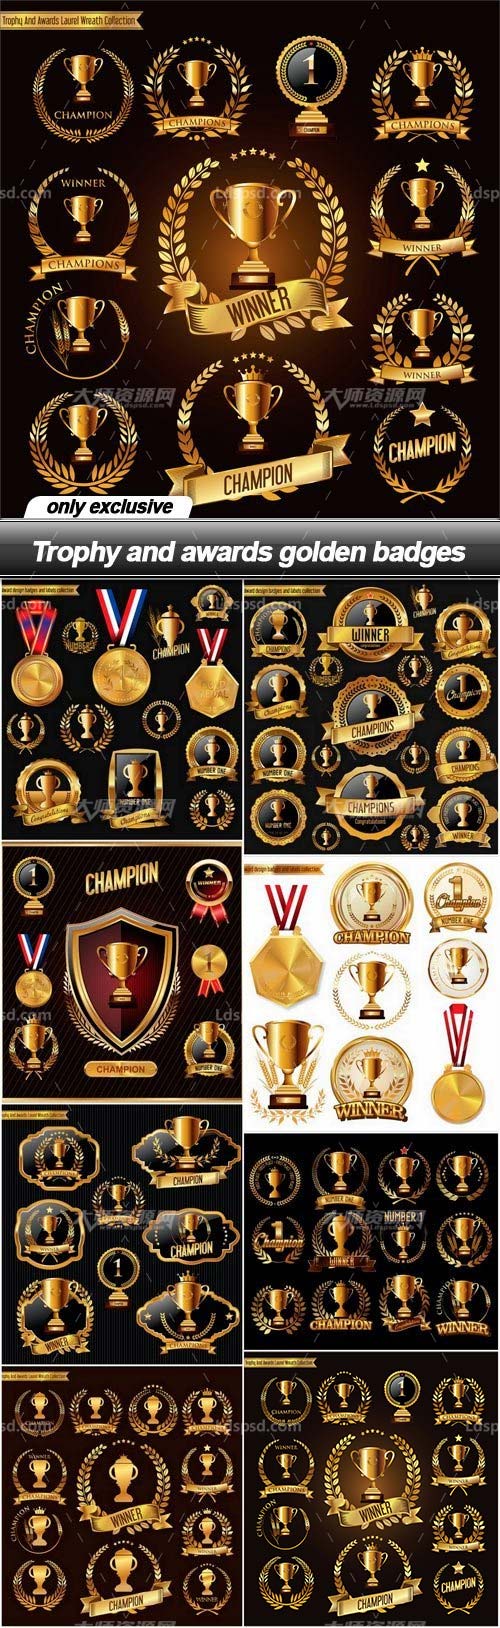 Trophy and awards golden badges,102个矢量的奖杯奖牌大合集